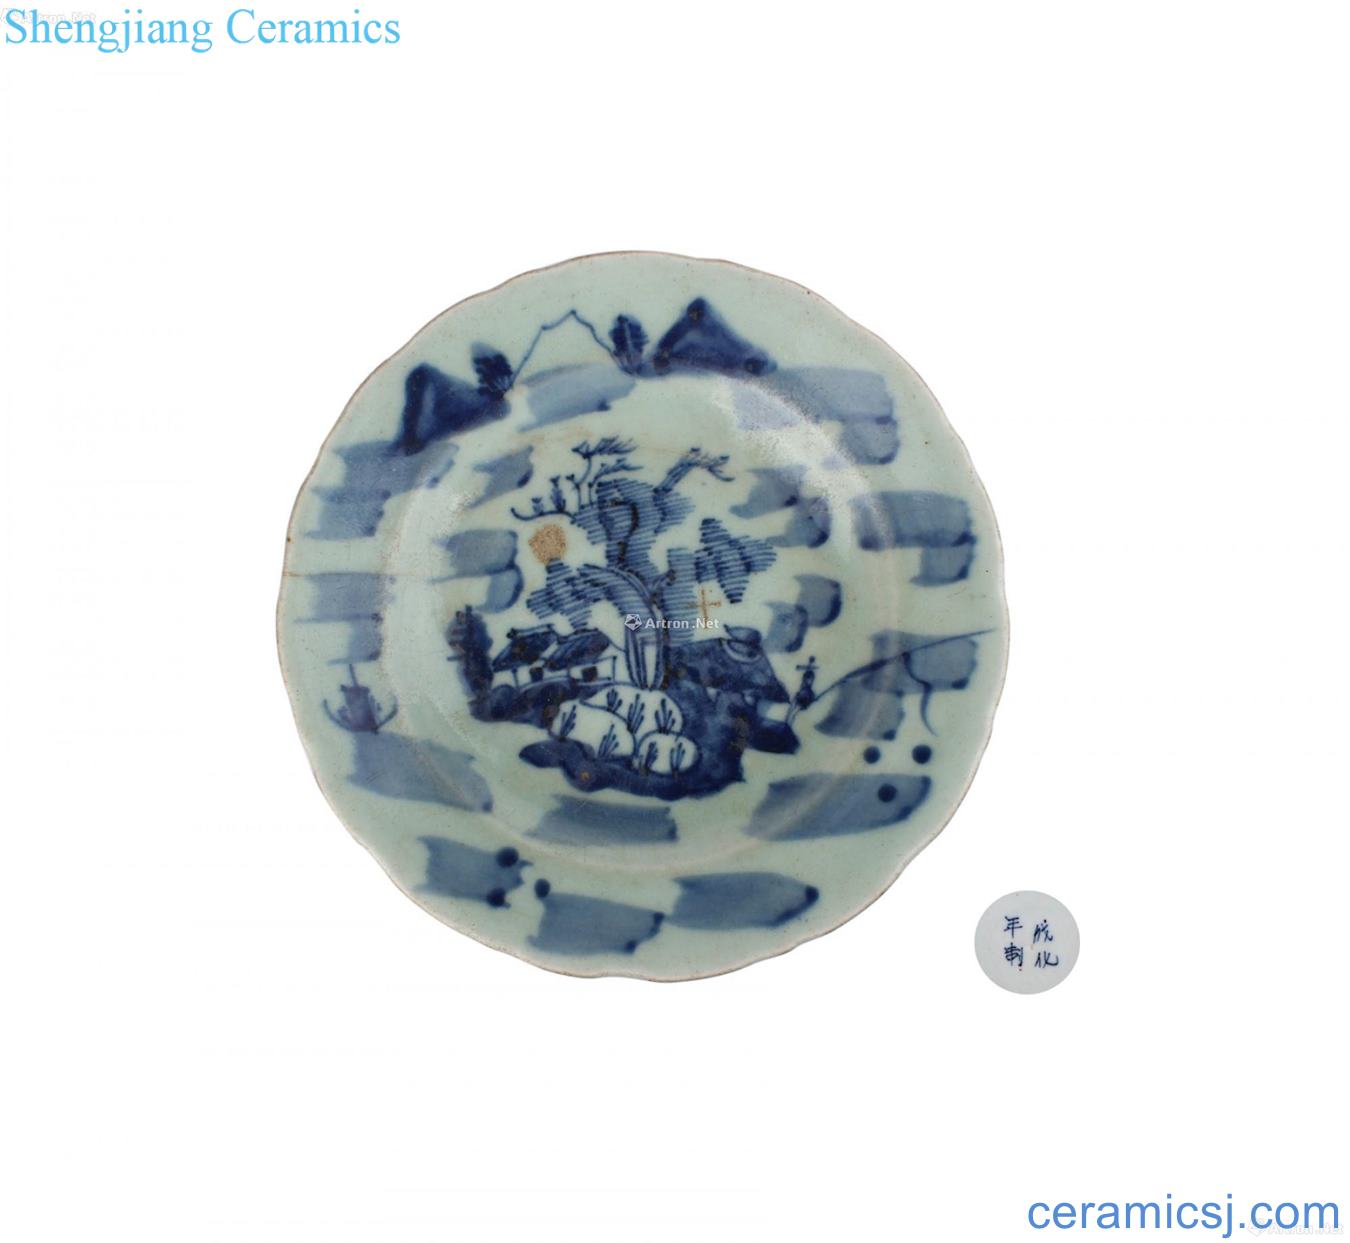 Pea green glaze blue and white landscape character lines kwai along the plate